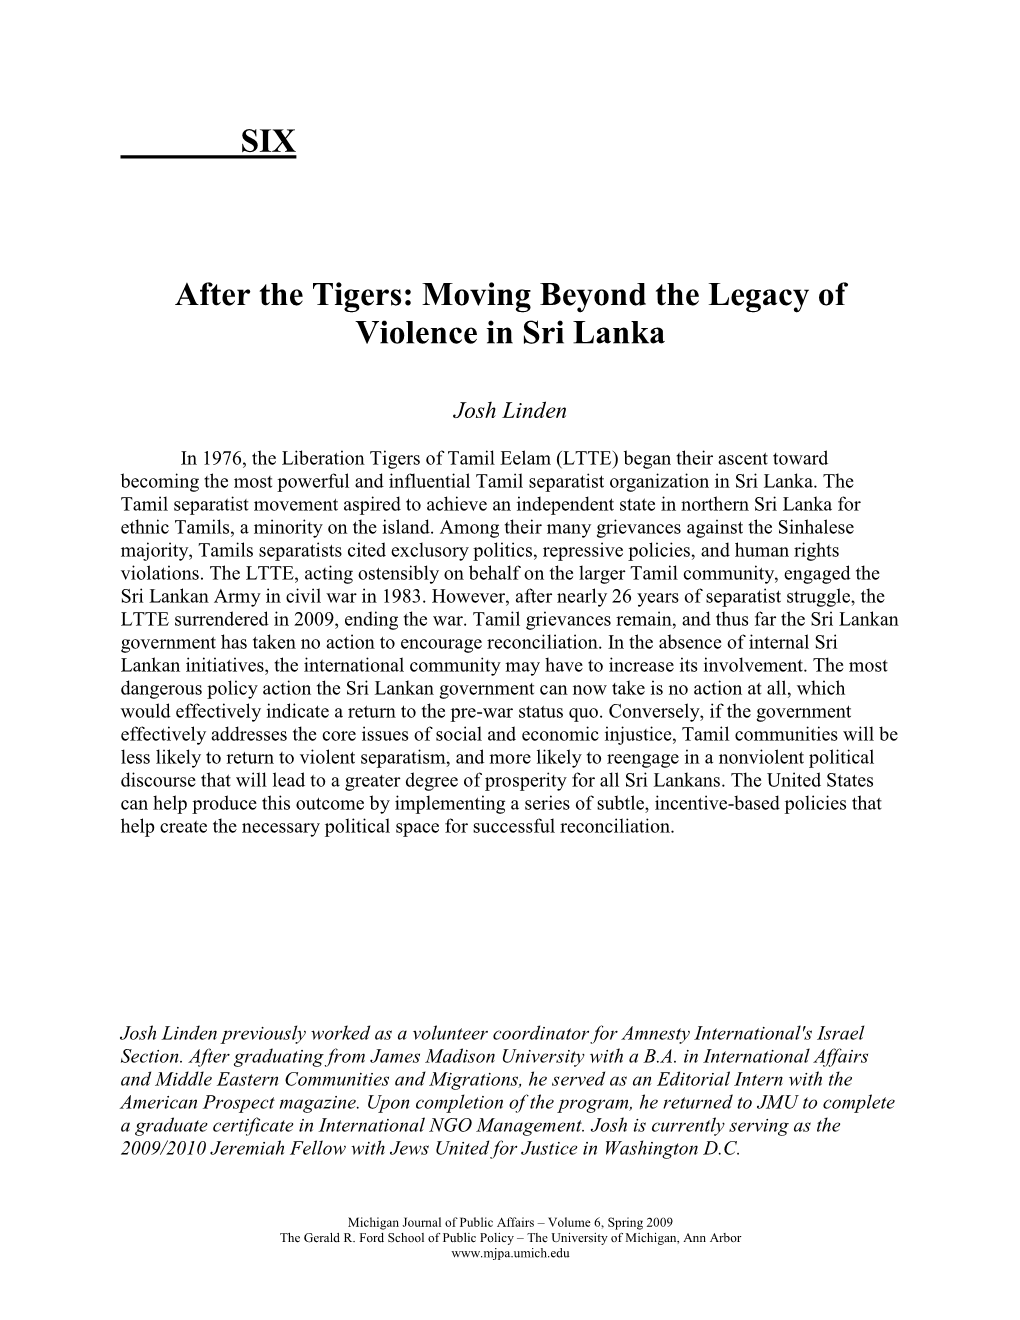 SIX After the Tigers: Moving Beyond the Legacy of Violence in Sri Lanka